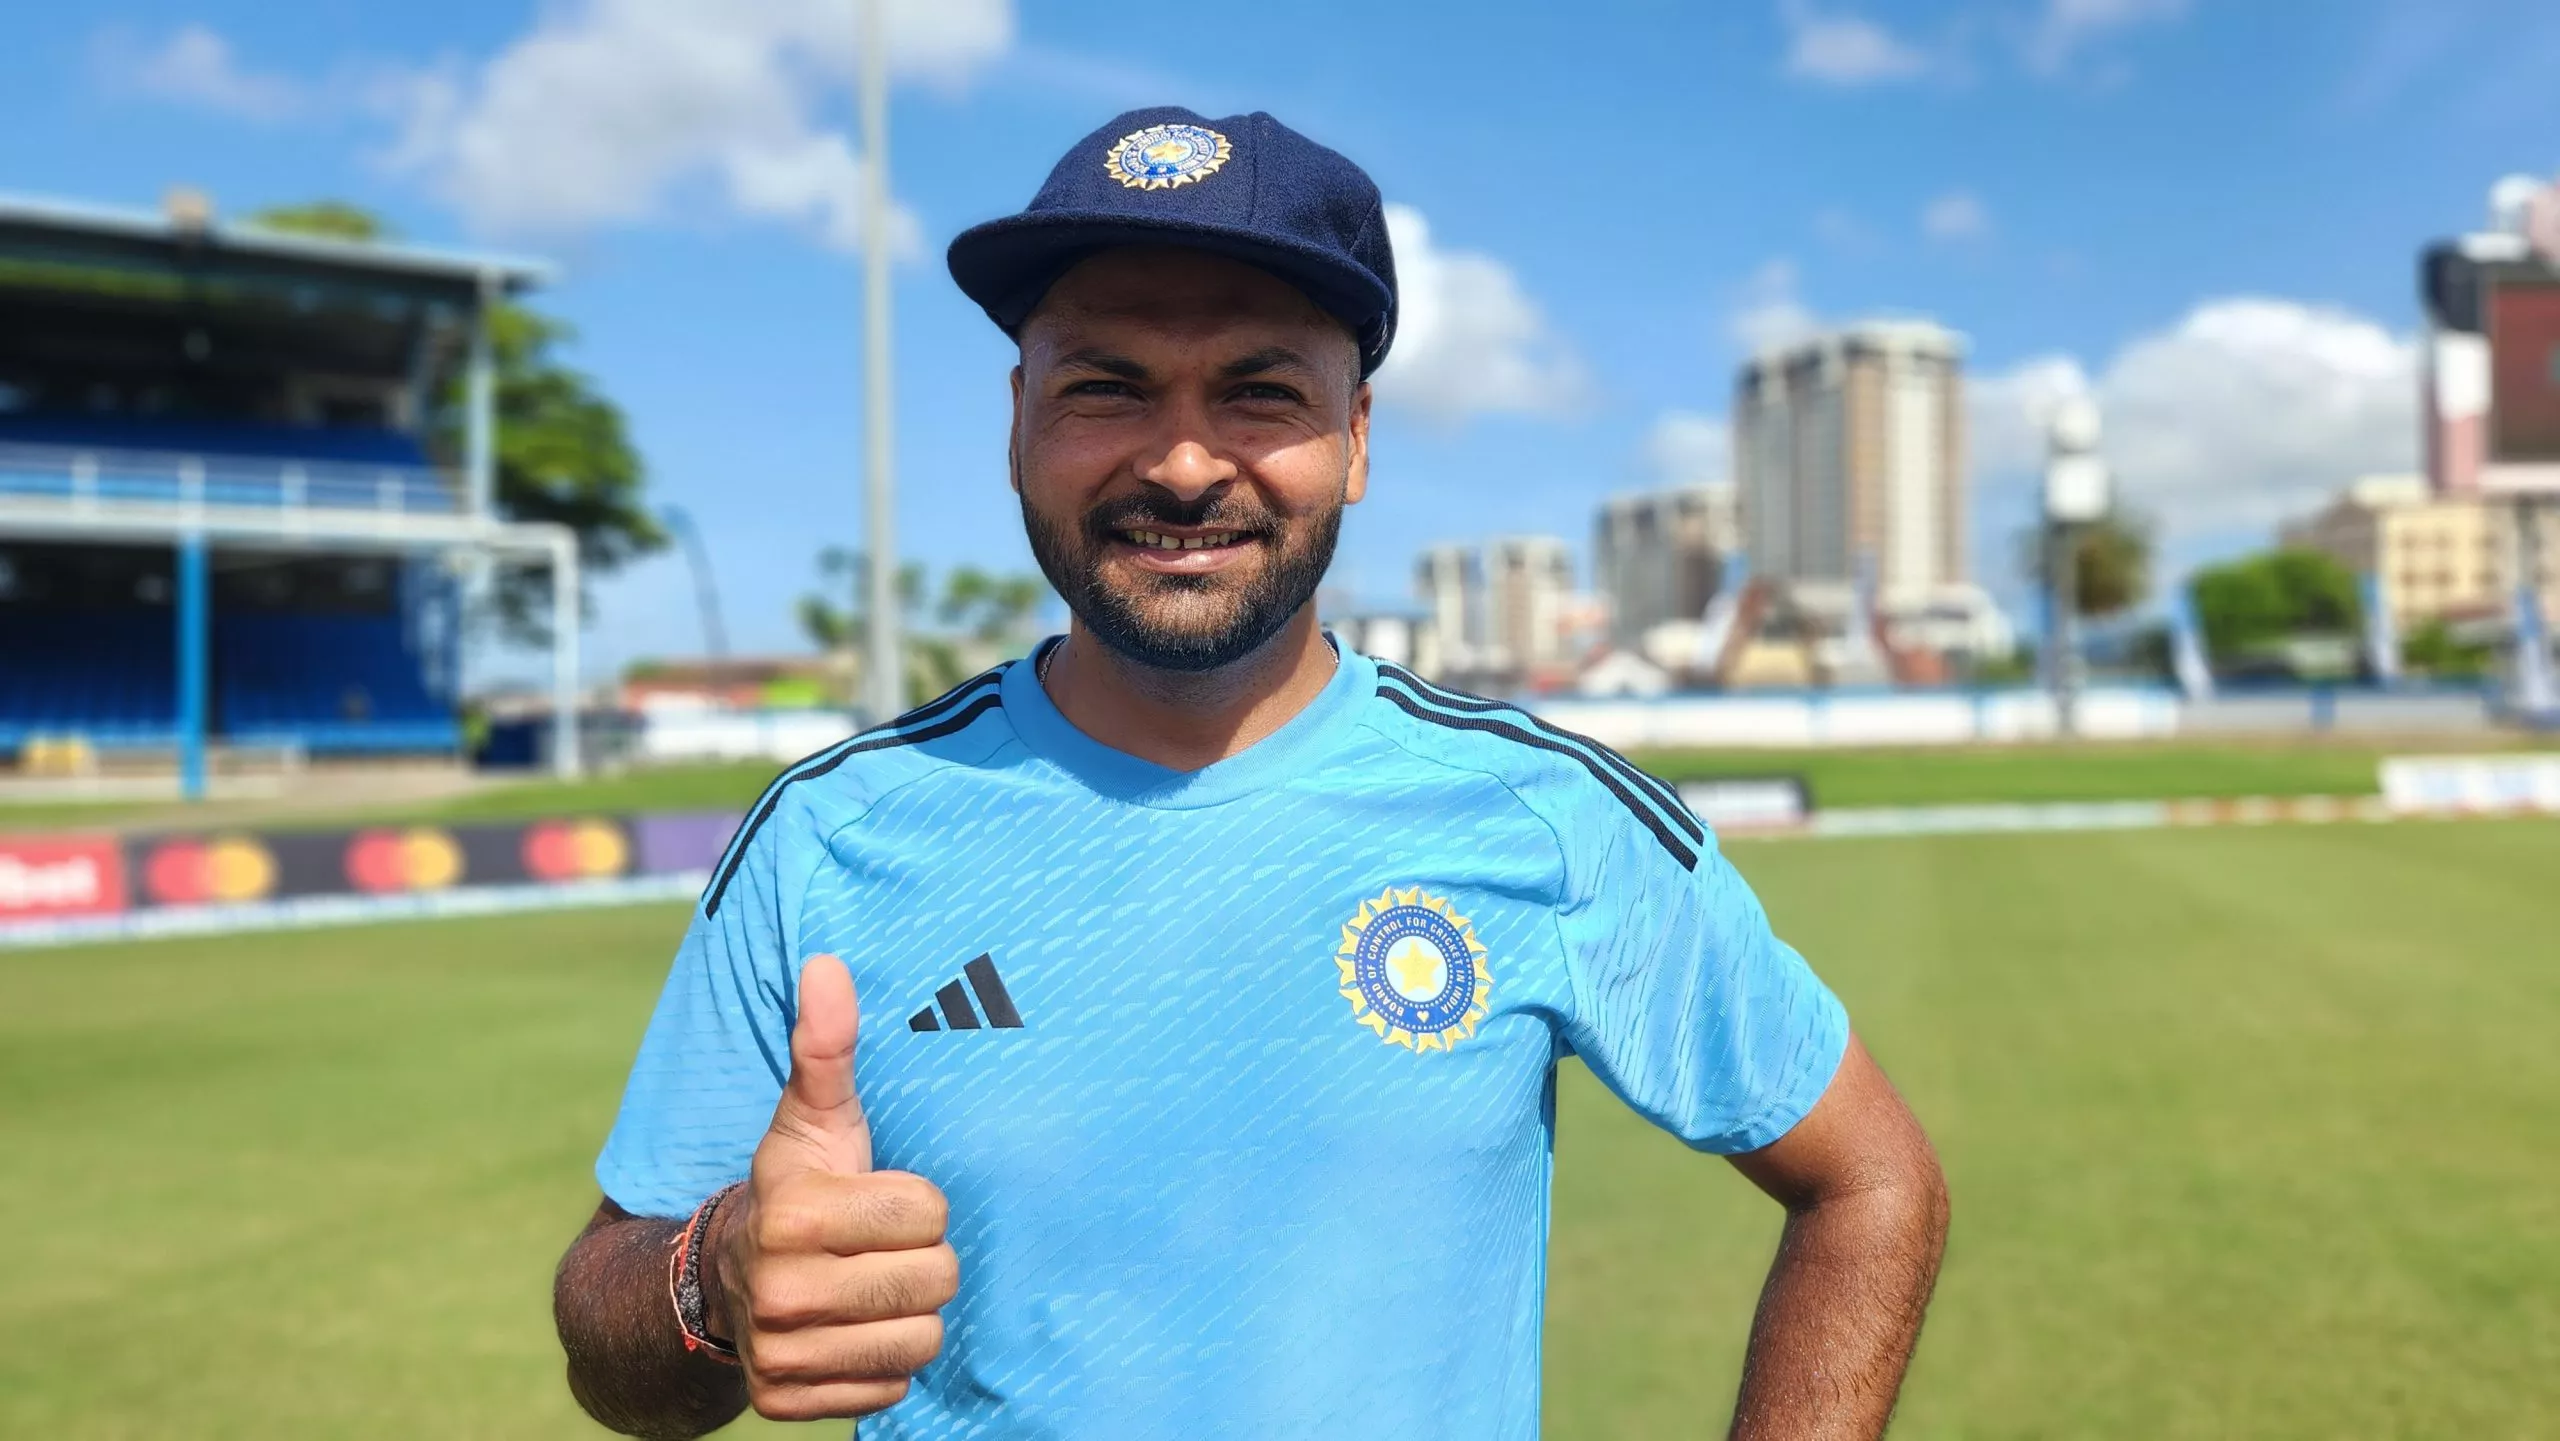 "Amount Of Hype" - Fans React As Mukesh Kumar Makes His Test Debut For India